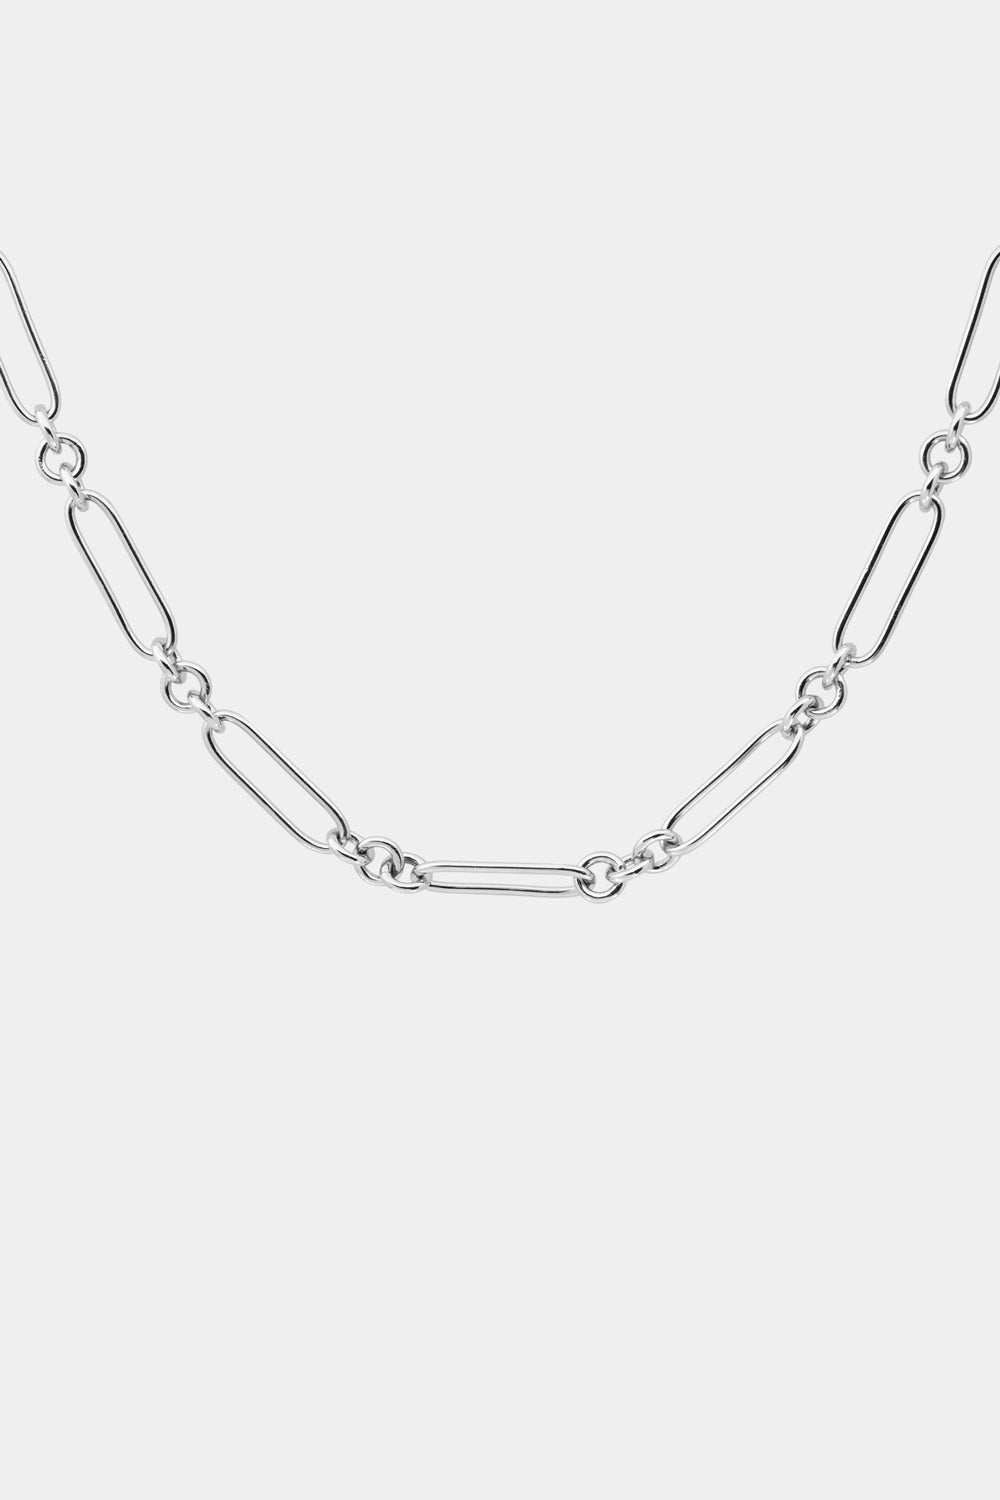 Lennox Necklace | Silver or 9K White Gold